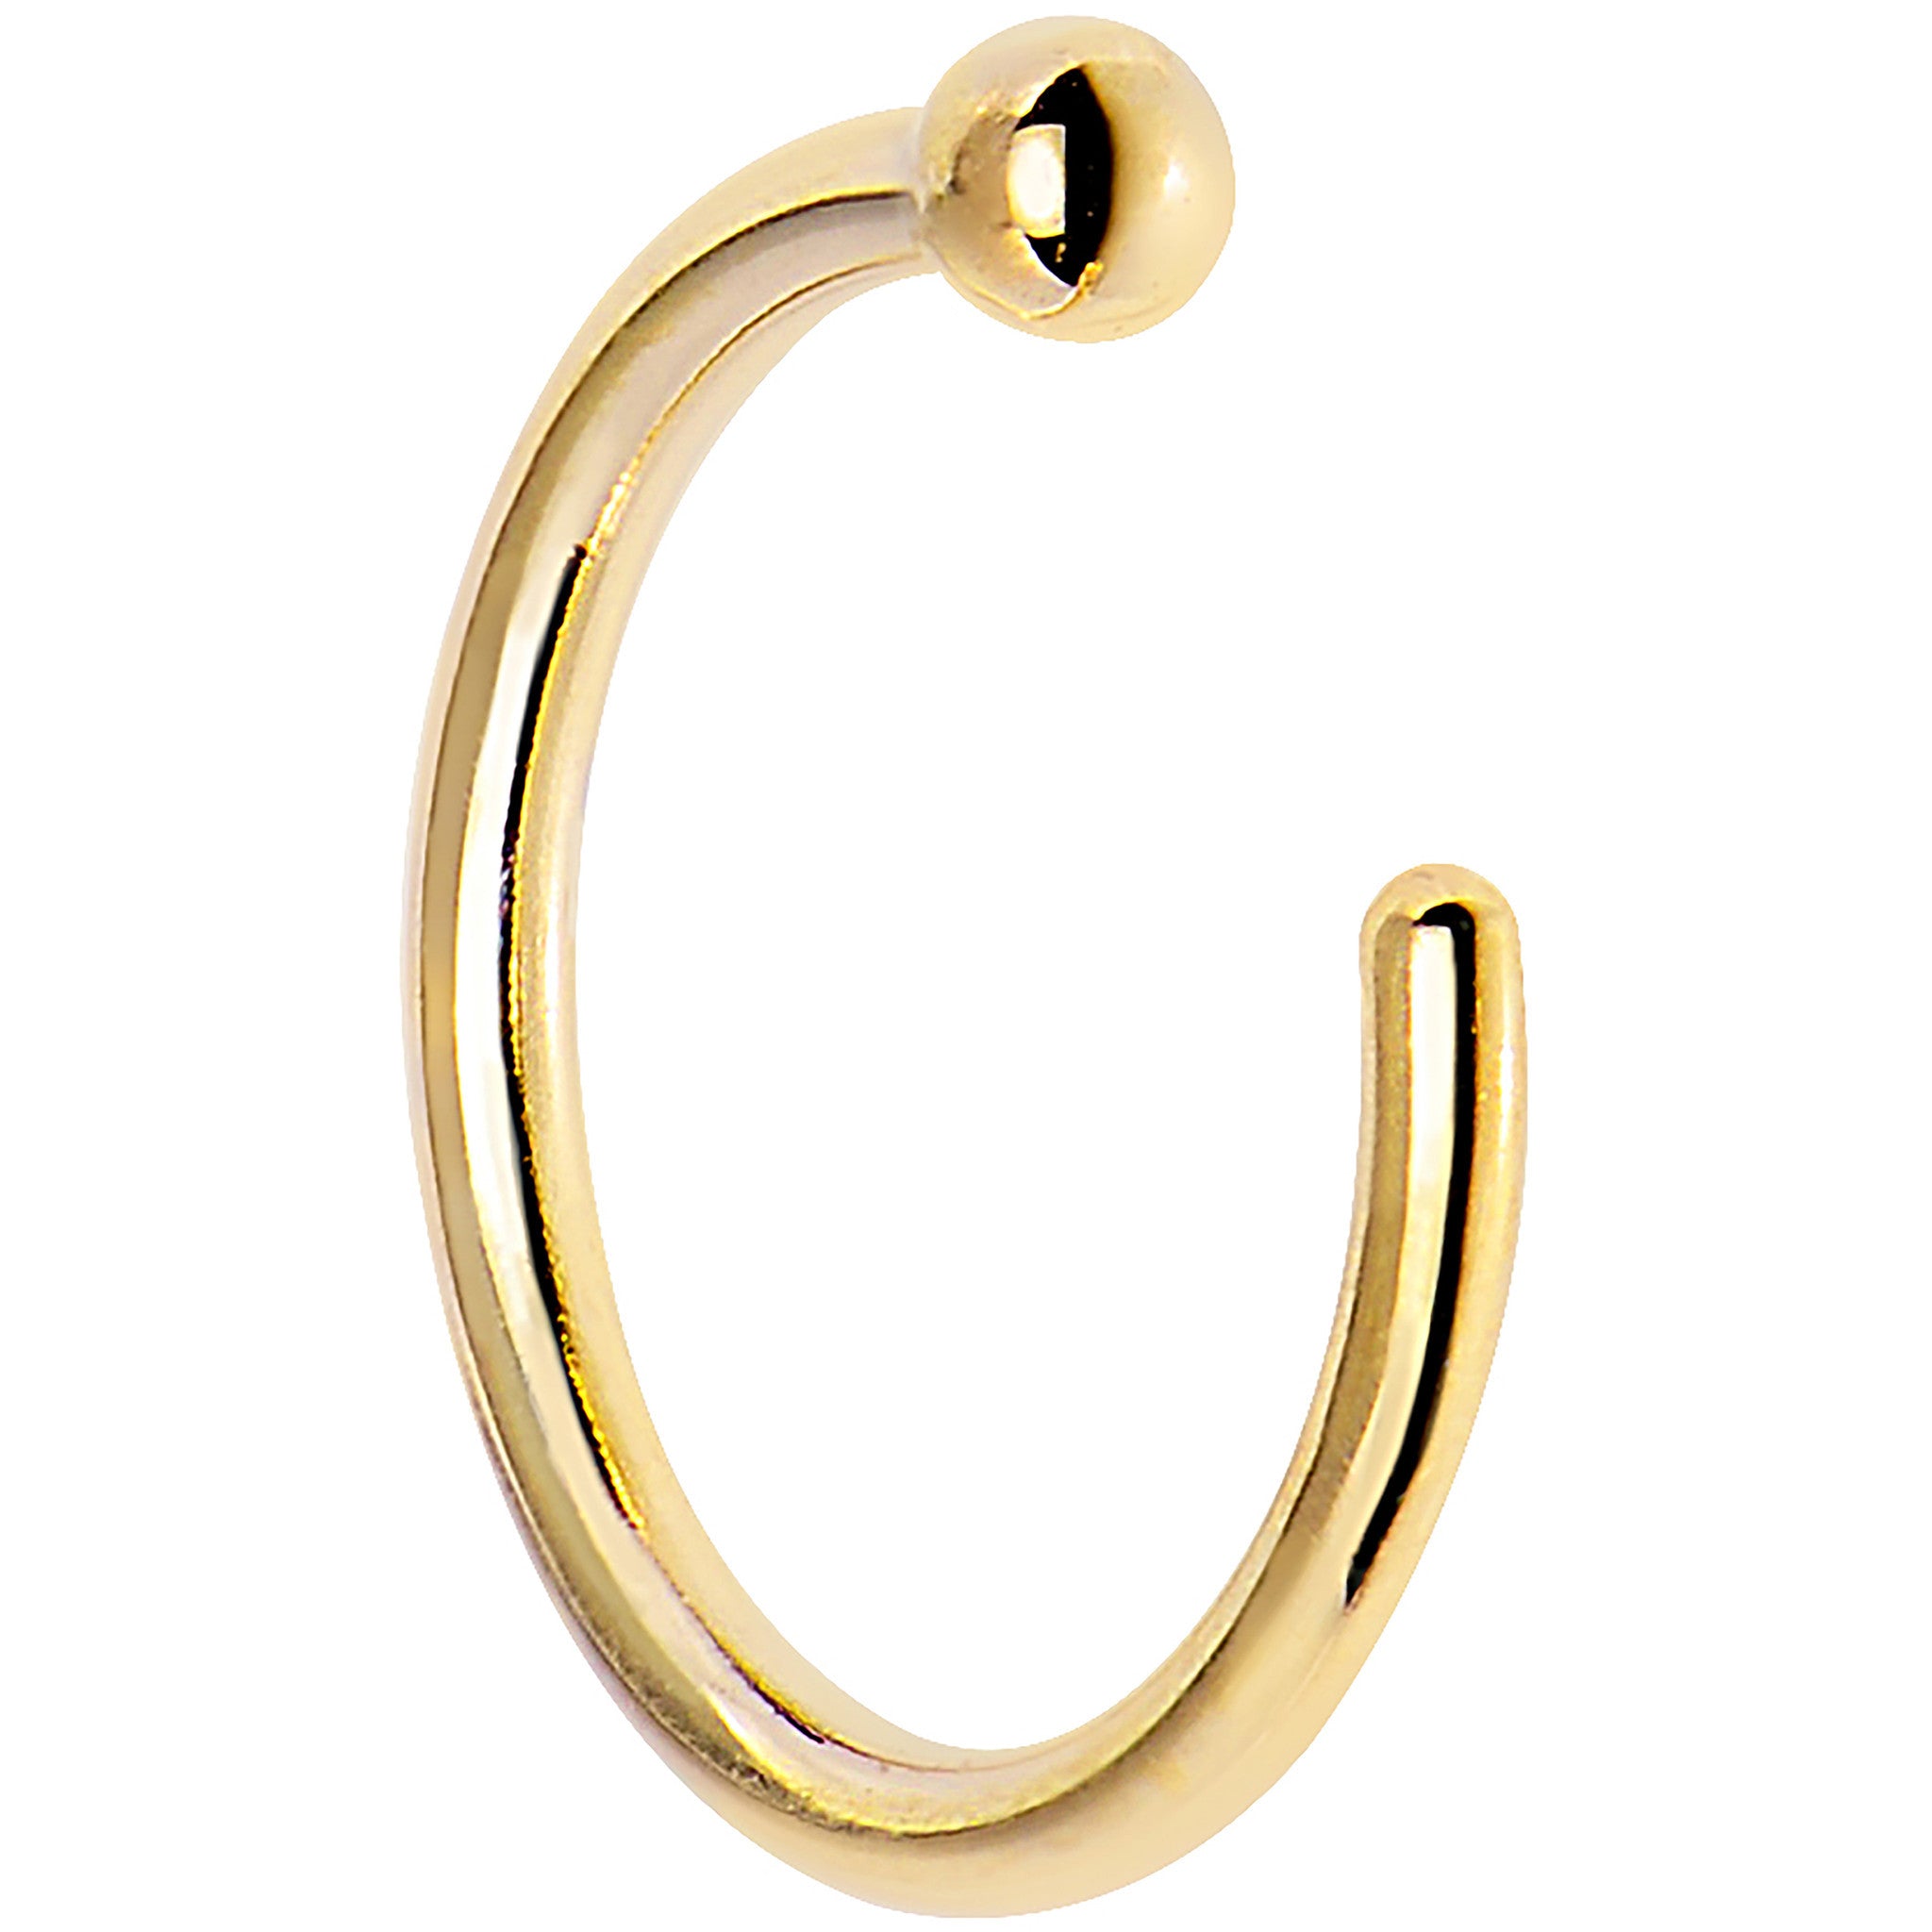 Amazon.com: 22g 7mm 14k Solid Gold Snug Fitting Nose Ring Hoop 22 Gauge Piercing  Jewelry : Handmade Products